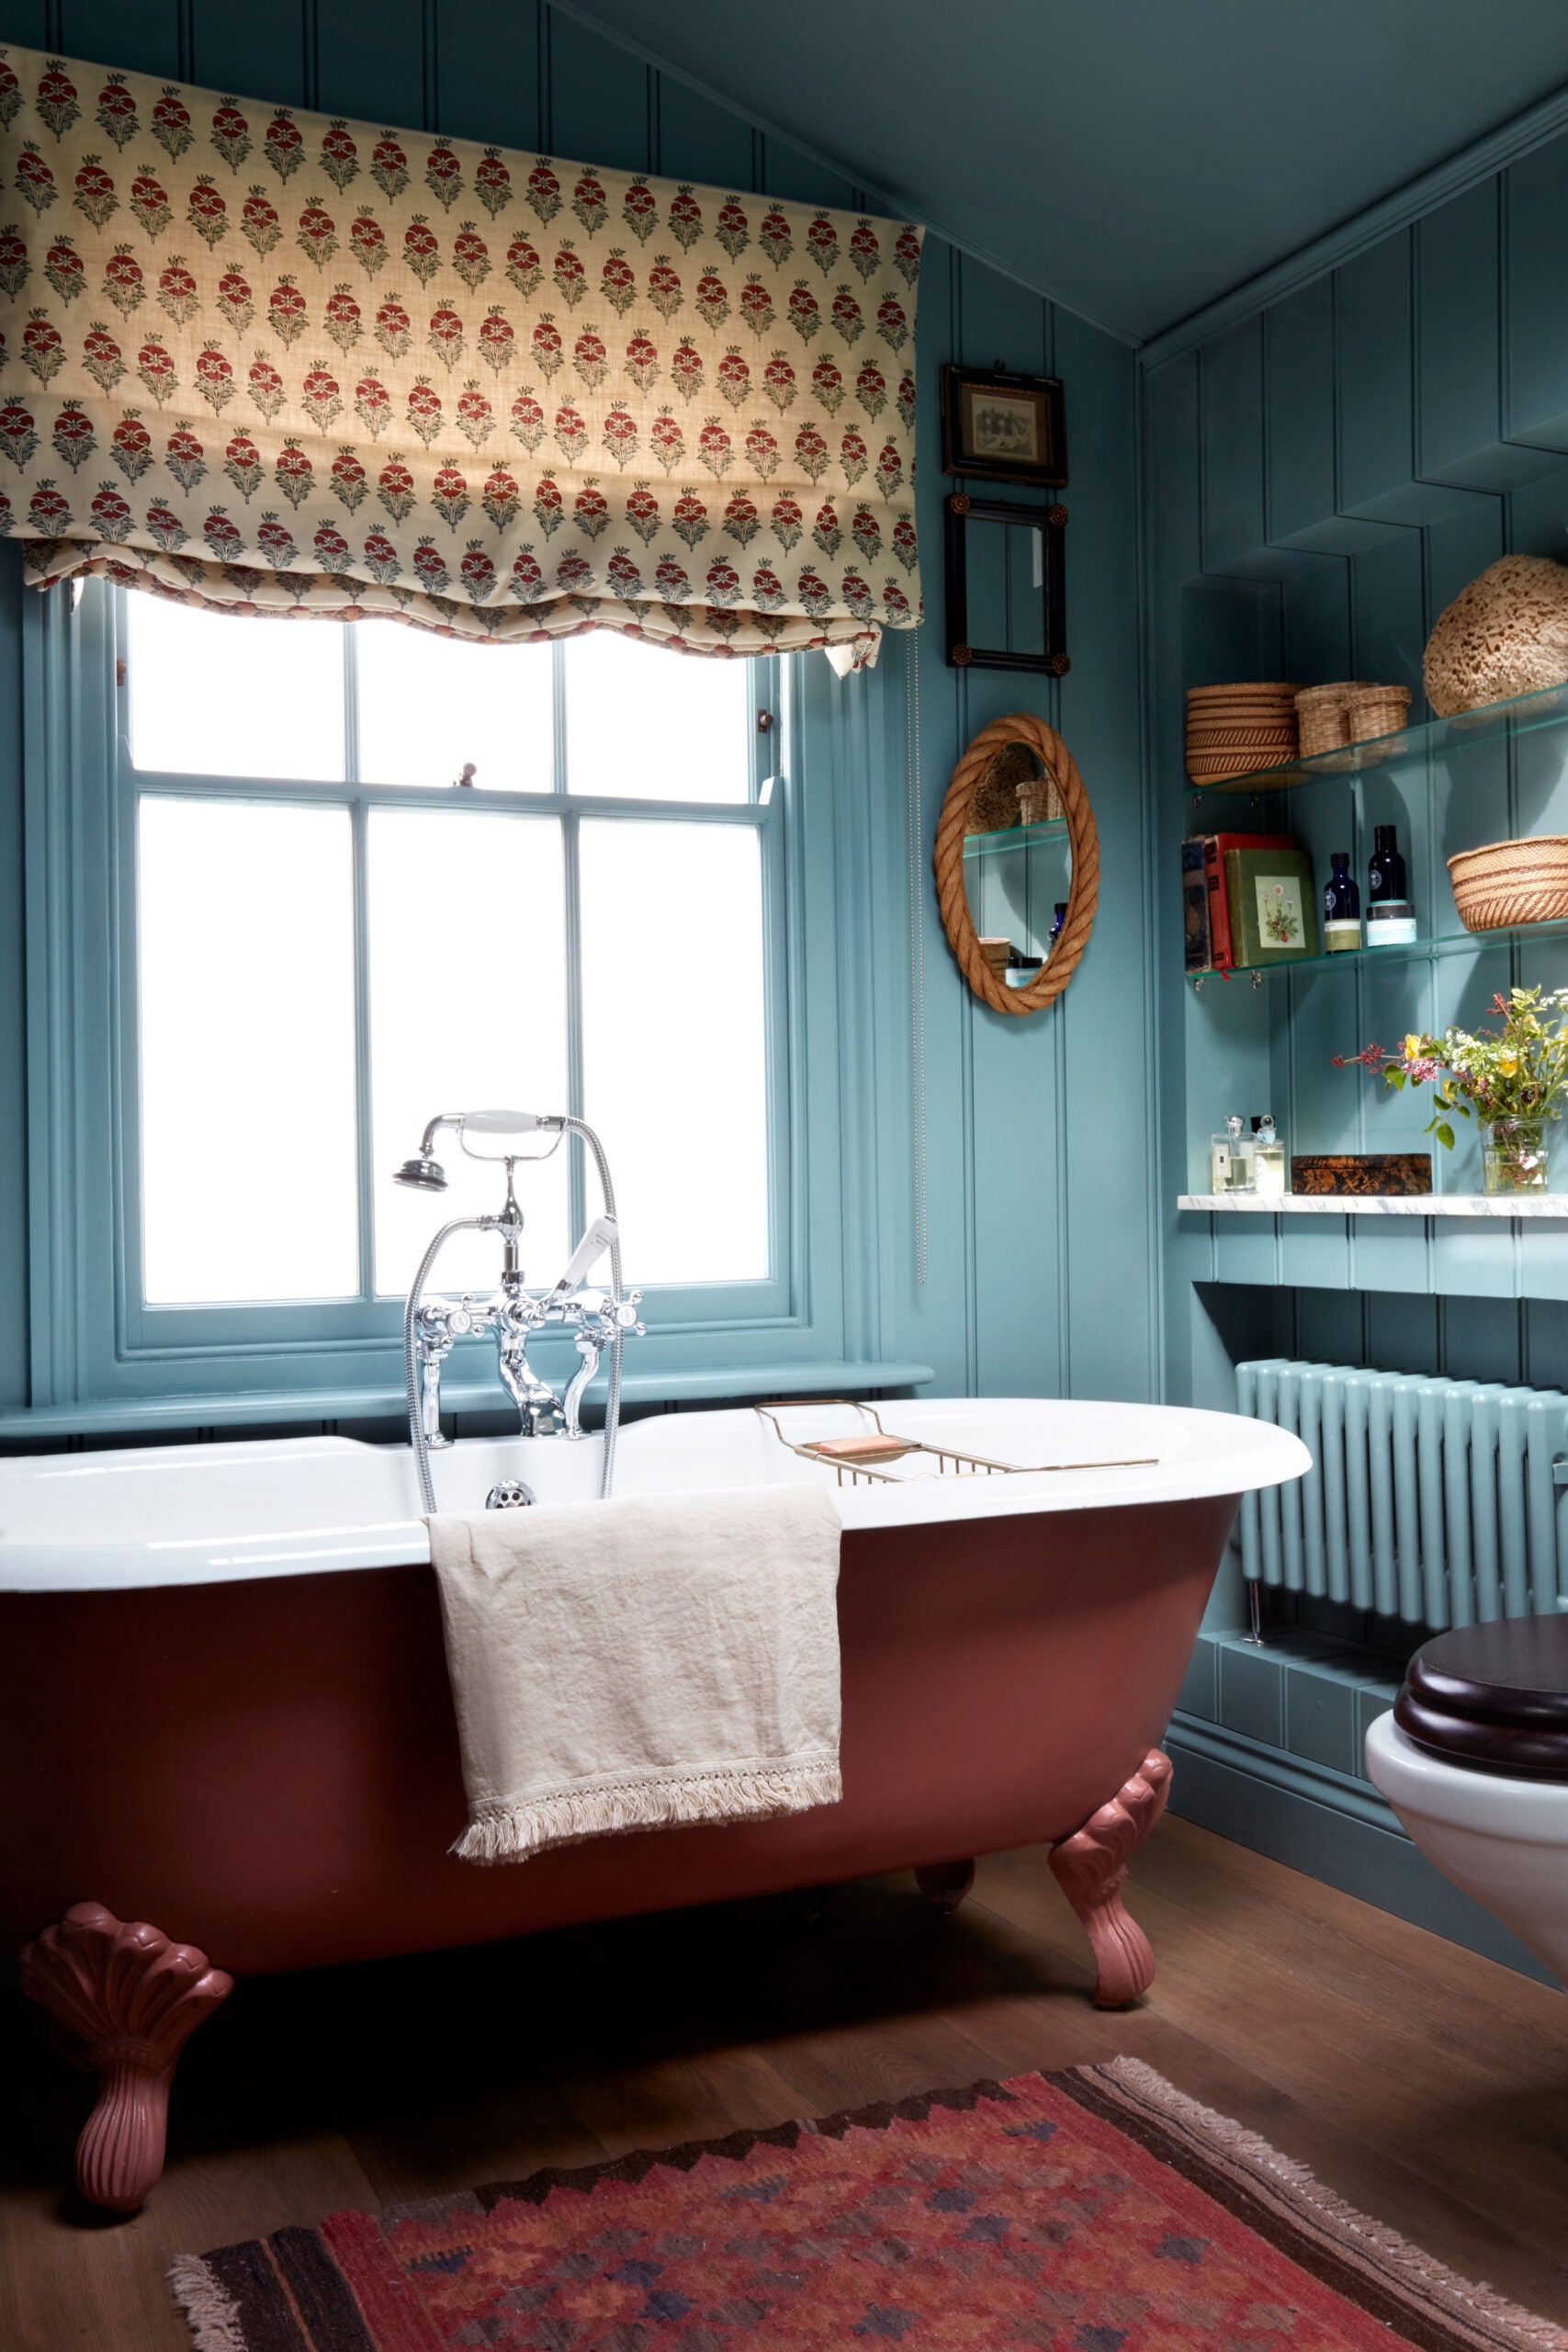 The Best Bathroom Paint Colors Are Blue and Green, According to 6 Designers